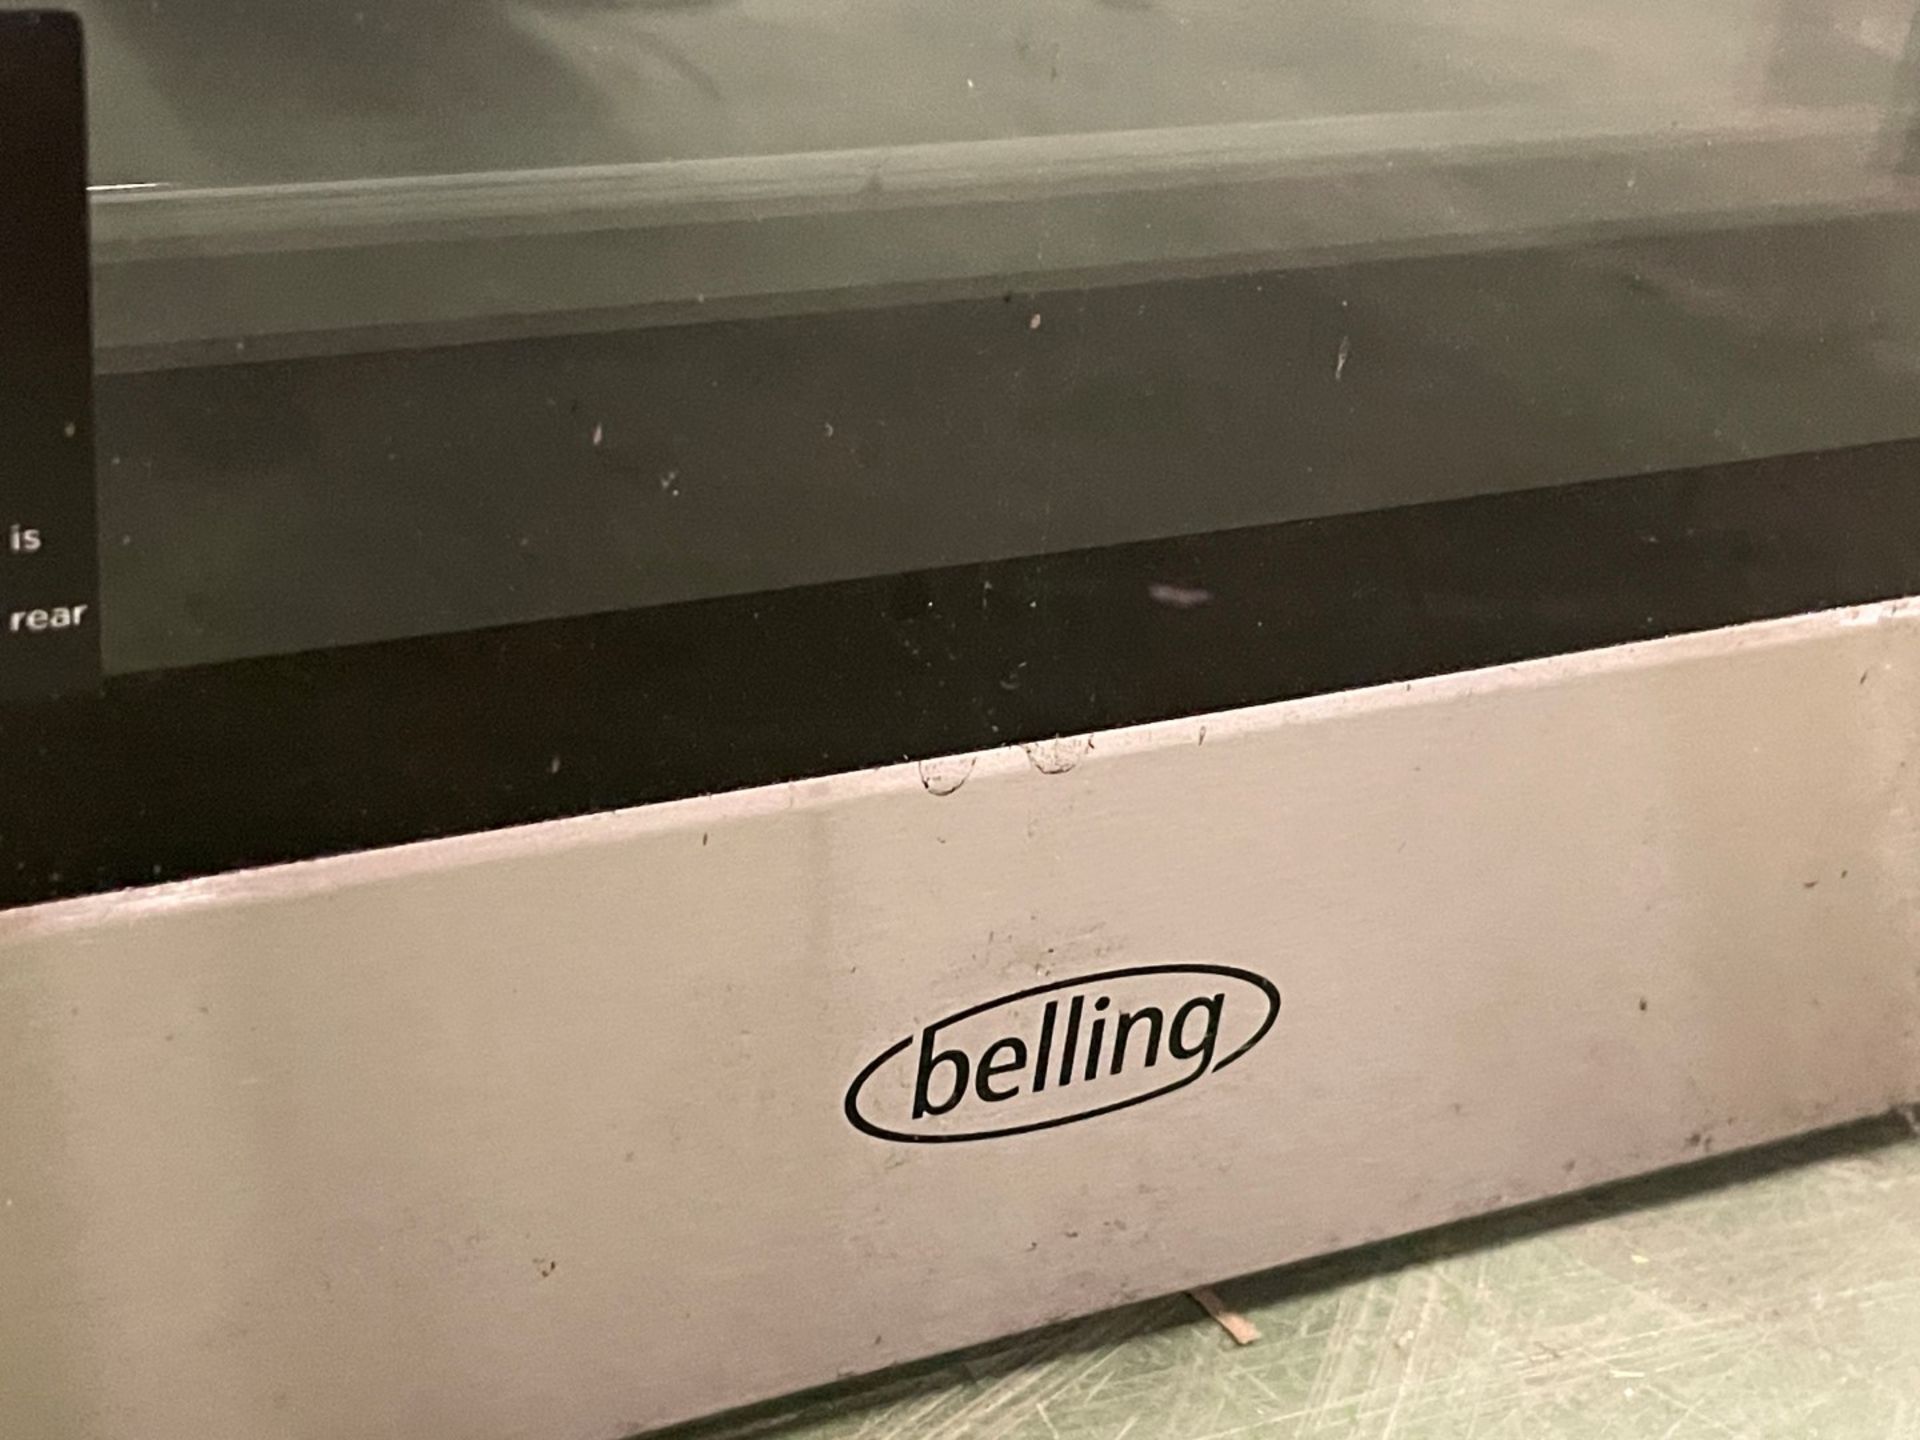 1 x Belling Integrated Oven - New and Unused With Damaged Glass Door - Image 4 of 7